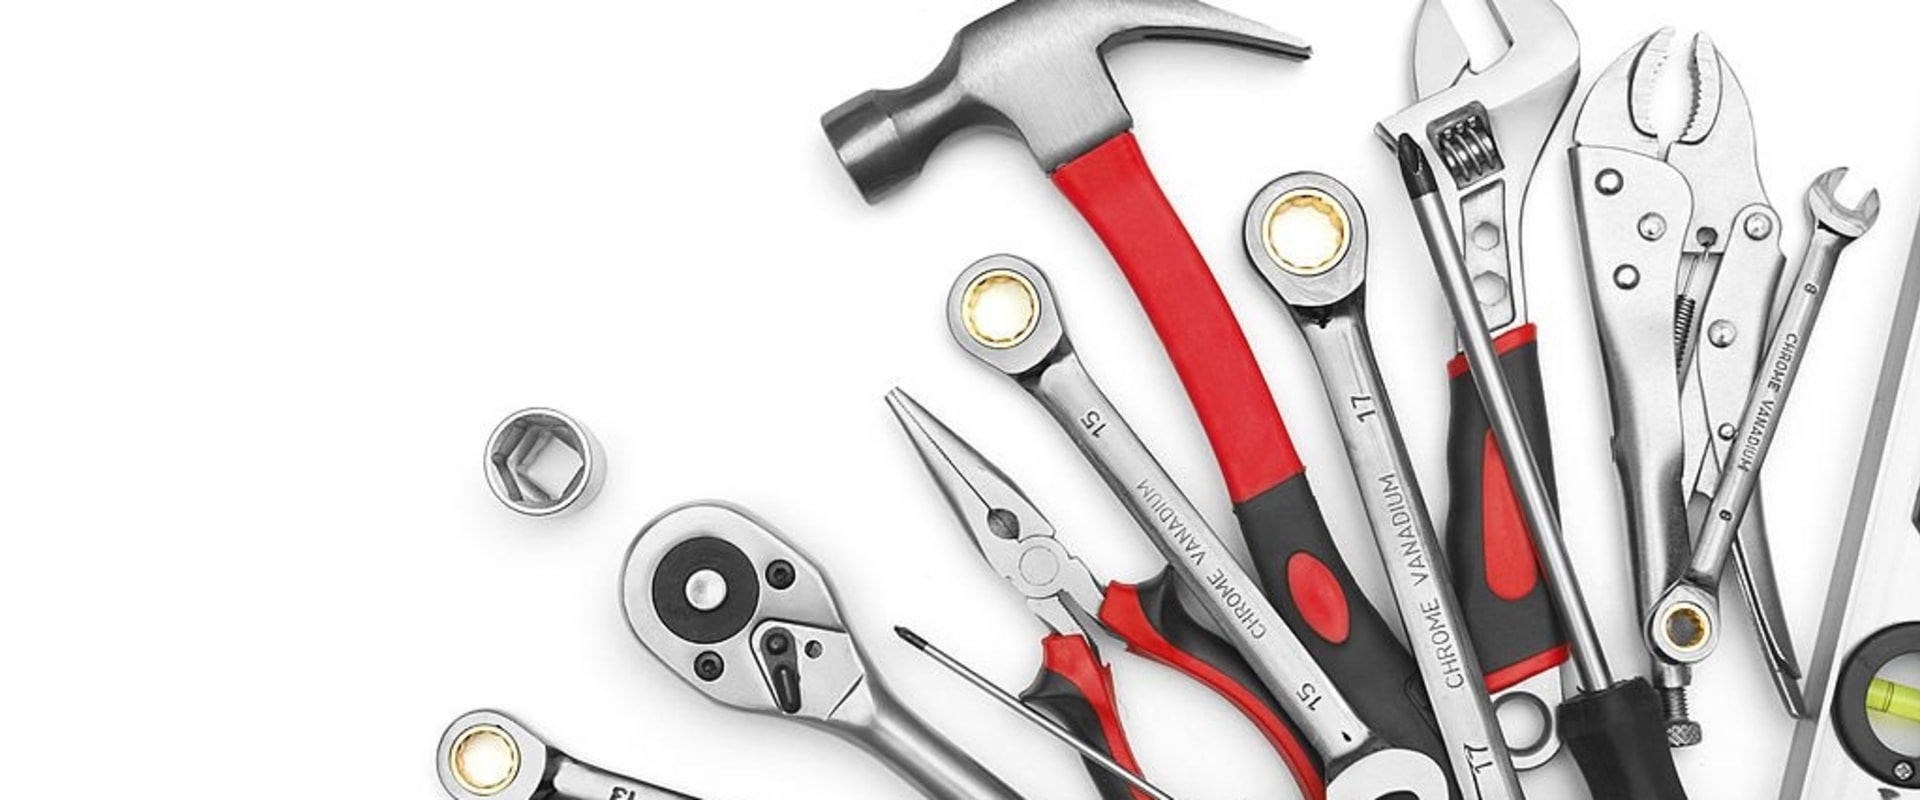 What are hand tools used for?